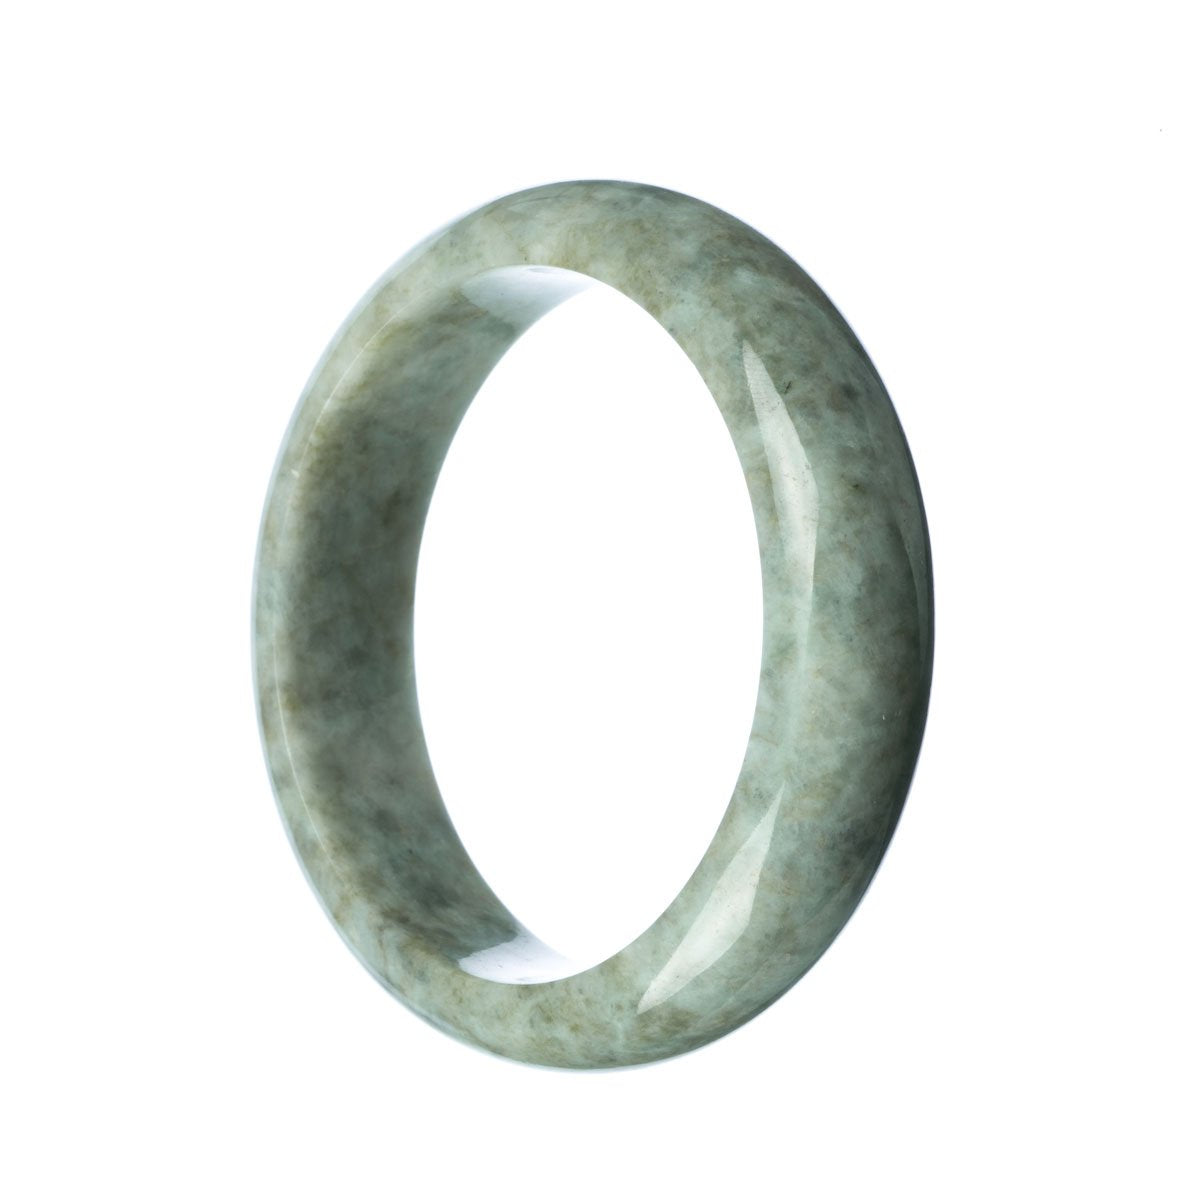 A close-up image of a Grade A Grey Traditional Jade Bangle Bracelet with a 63mm Half Moon shape, featuring intricate patterns and a smooth finish.